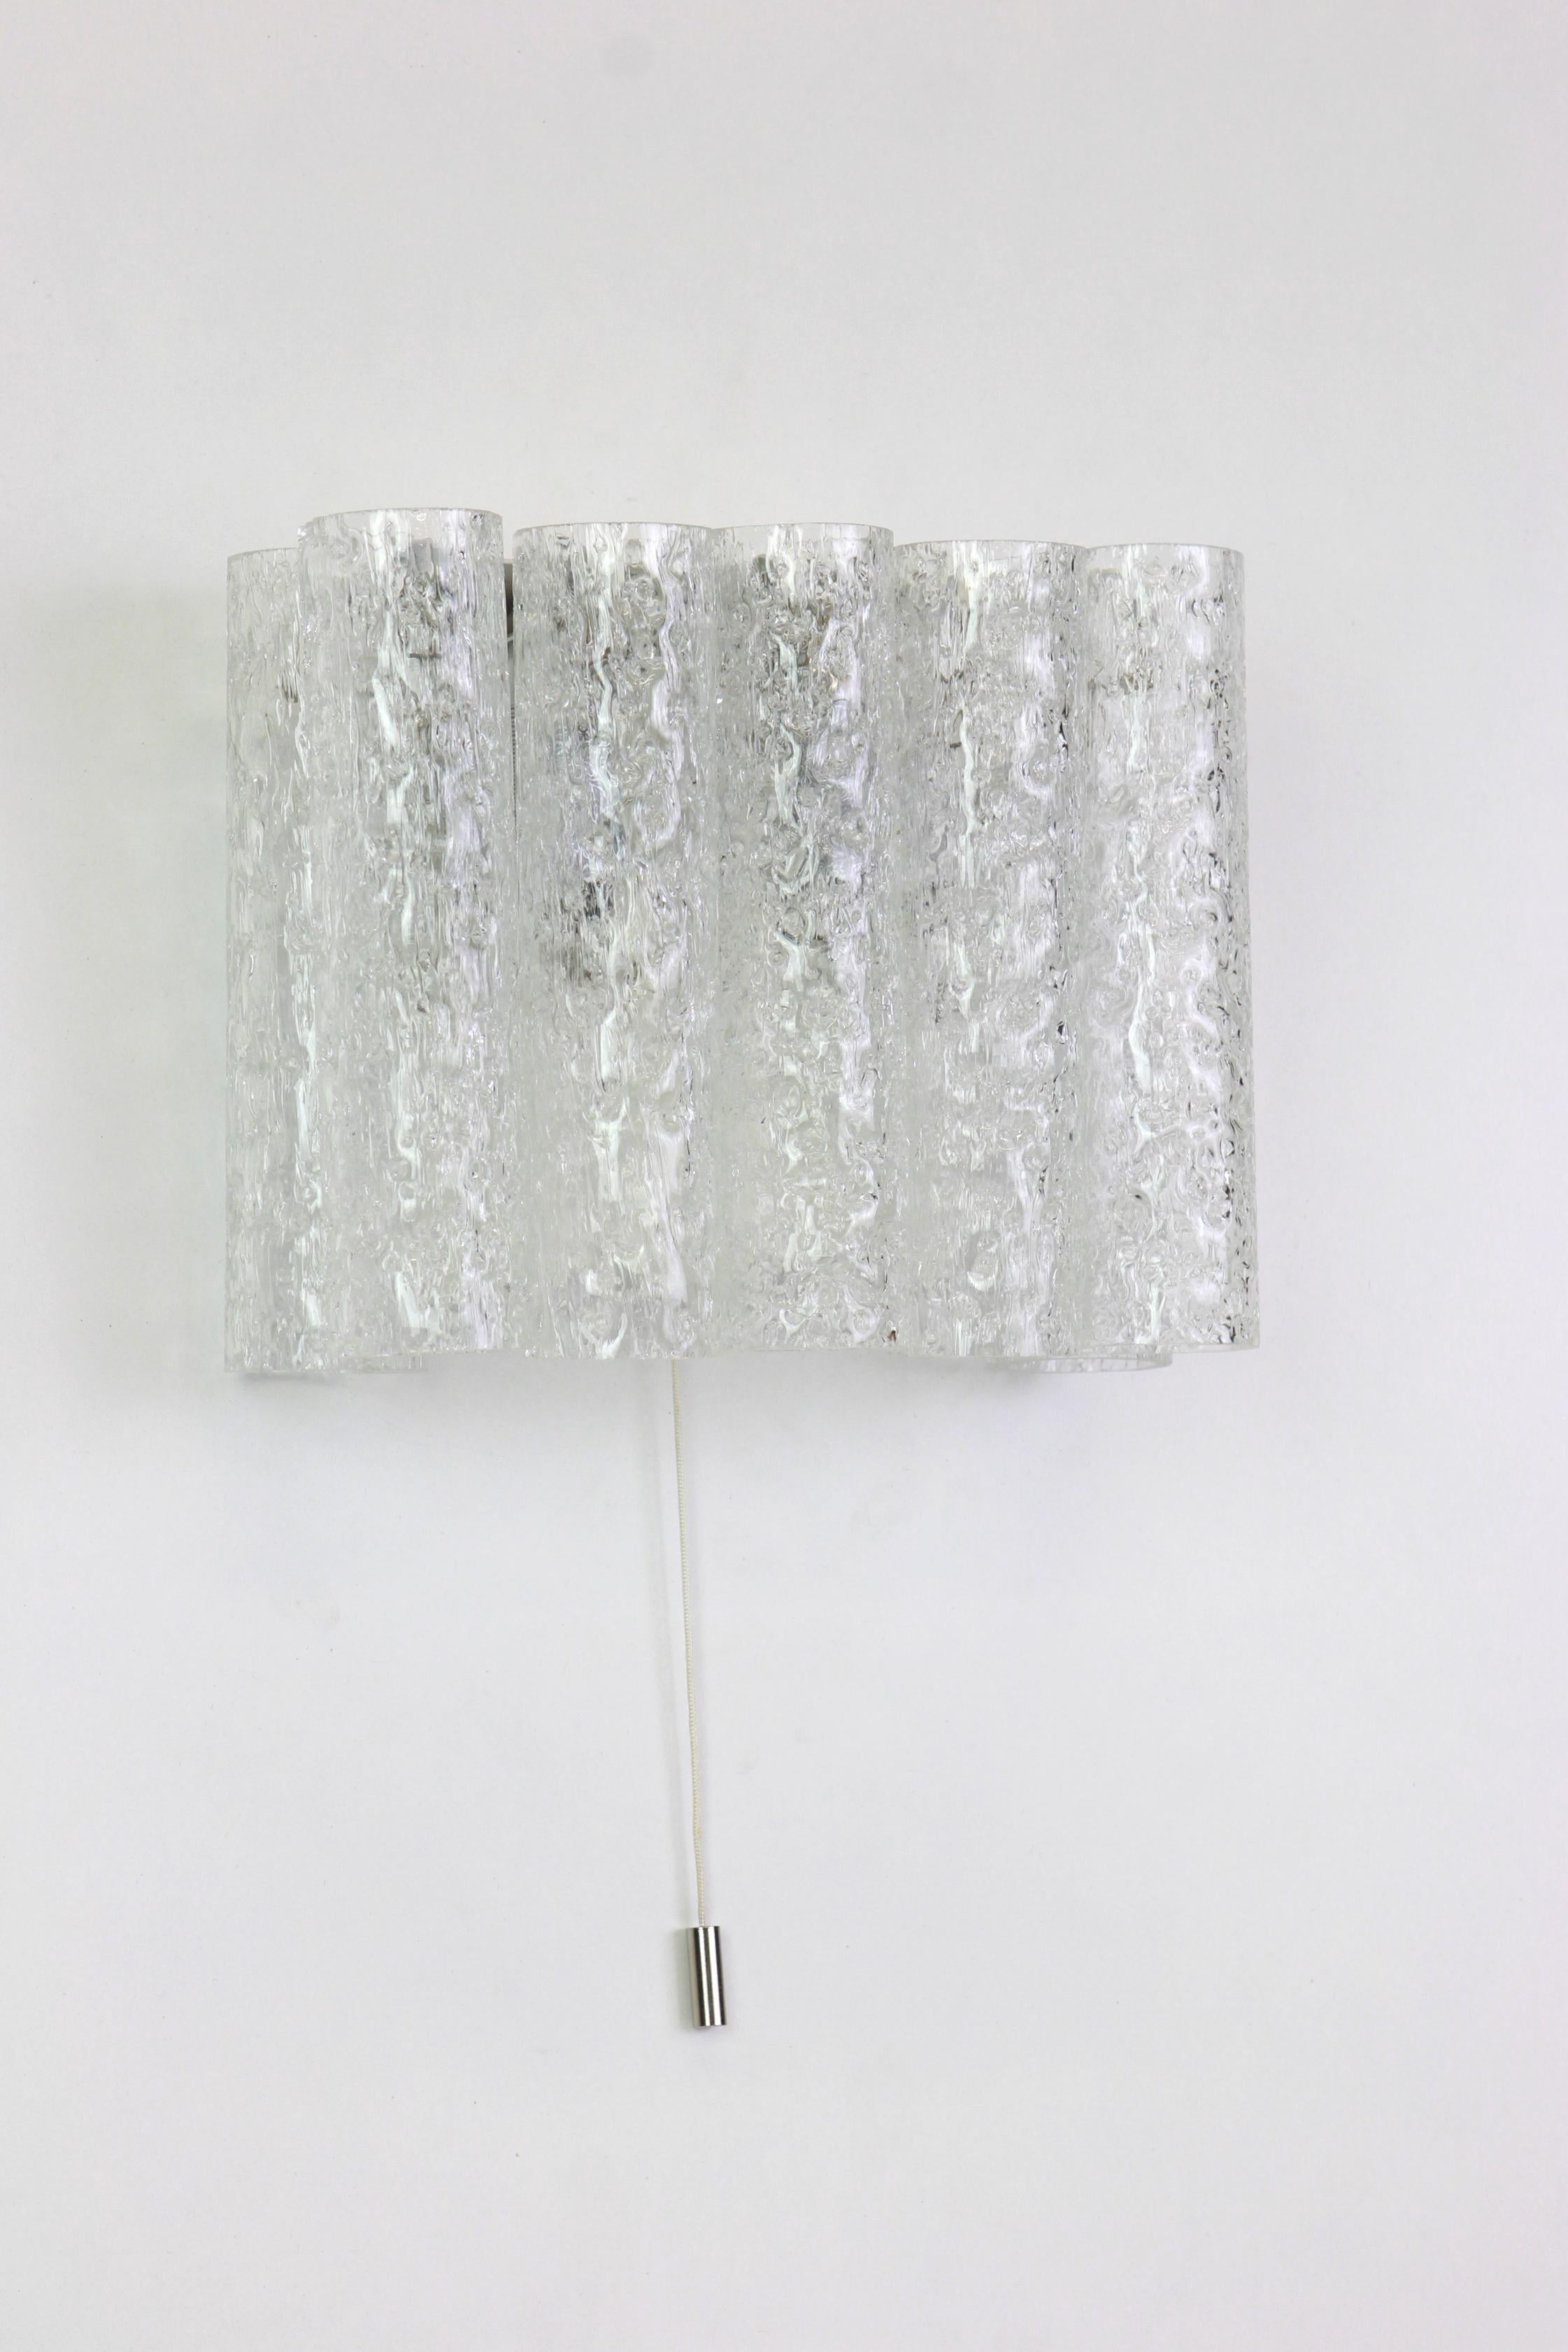 Wonderful pair of midcentury wall sconces with Murano glass tubes, made by Doria Leuchten, Germany, manufactured, circa 1960-1969.

Each sconce needs two E14 small bulb.

Heavy quality and in very good condition. Cleaned, well-wired and ready to